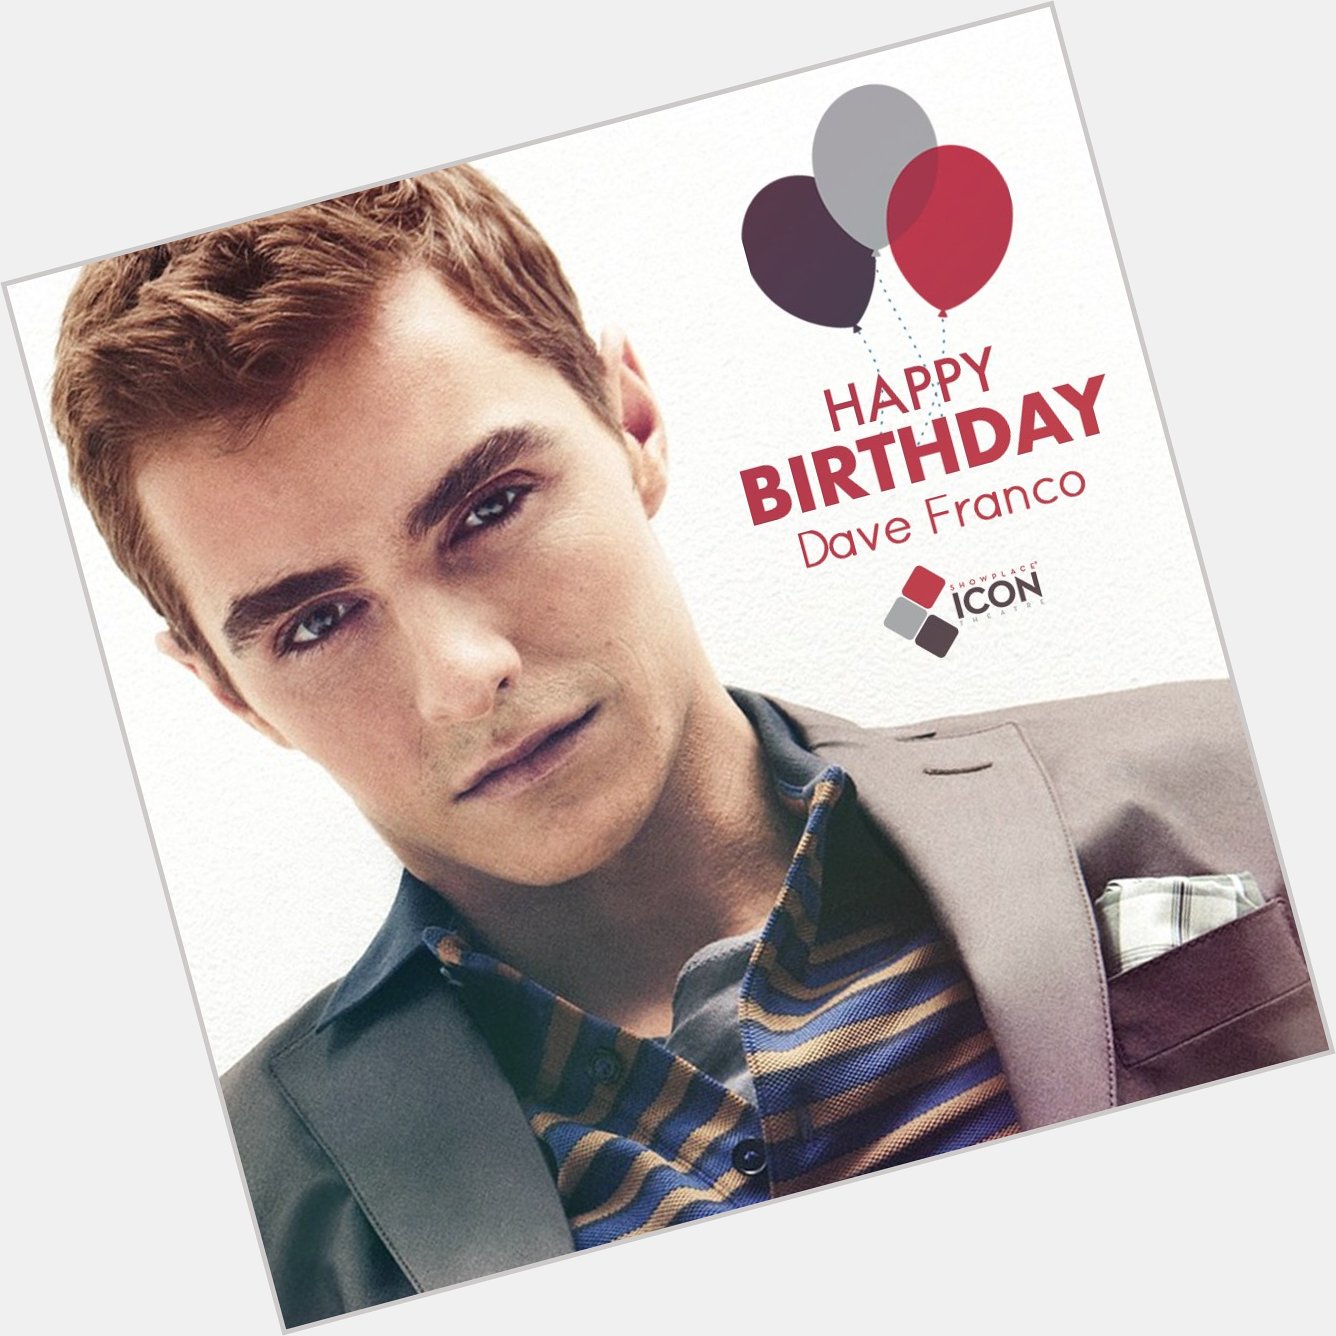 We\re always game for a Dave Franco movie. Happy birthday!
Visit: 